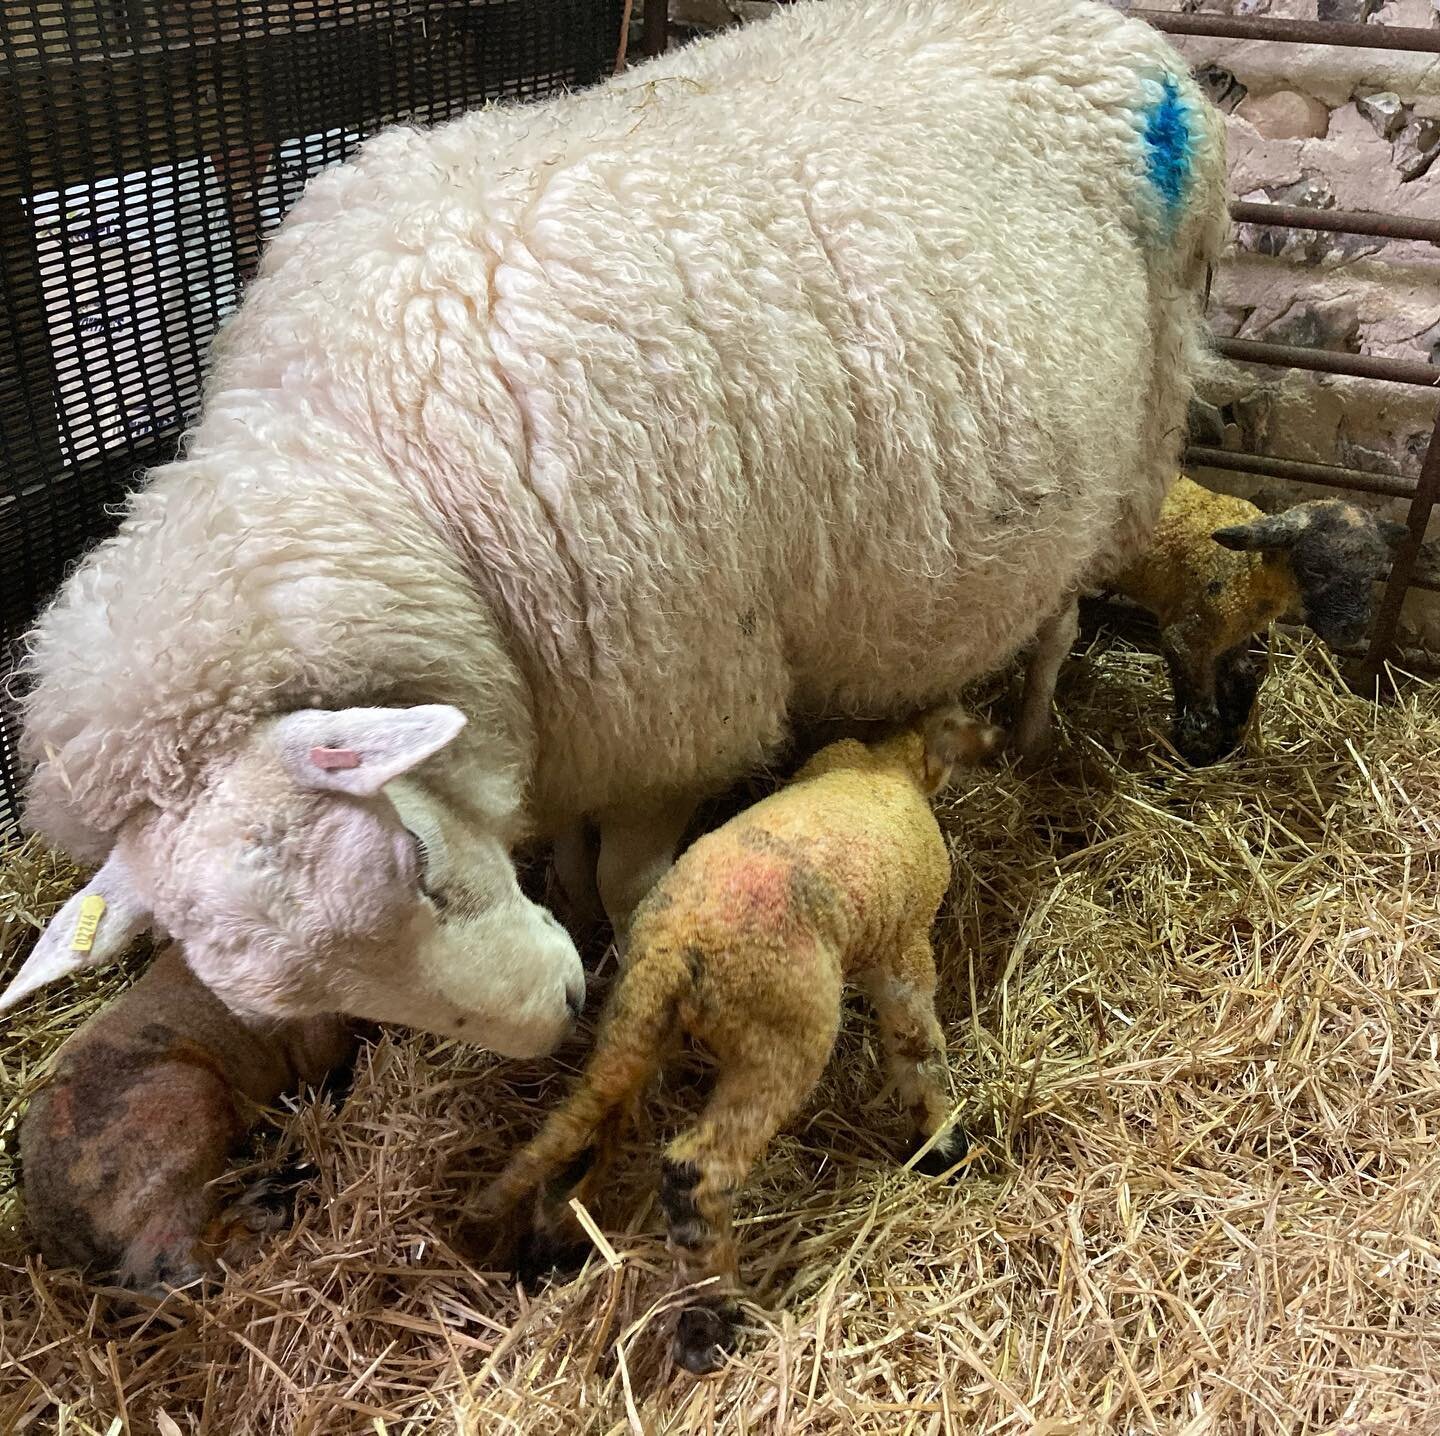 1, 2, 3. Supermum 💪🏻🐑💚

Come and visit us this weekend 2/3 April or next 9/10 April. Tickets available at www.camillaandroly.co.uk/open-days 

#camillaandroly #saddlescombefarm #lambing #lambing2022 #lambingopendays #devilsdyke #thingstodo #easte